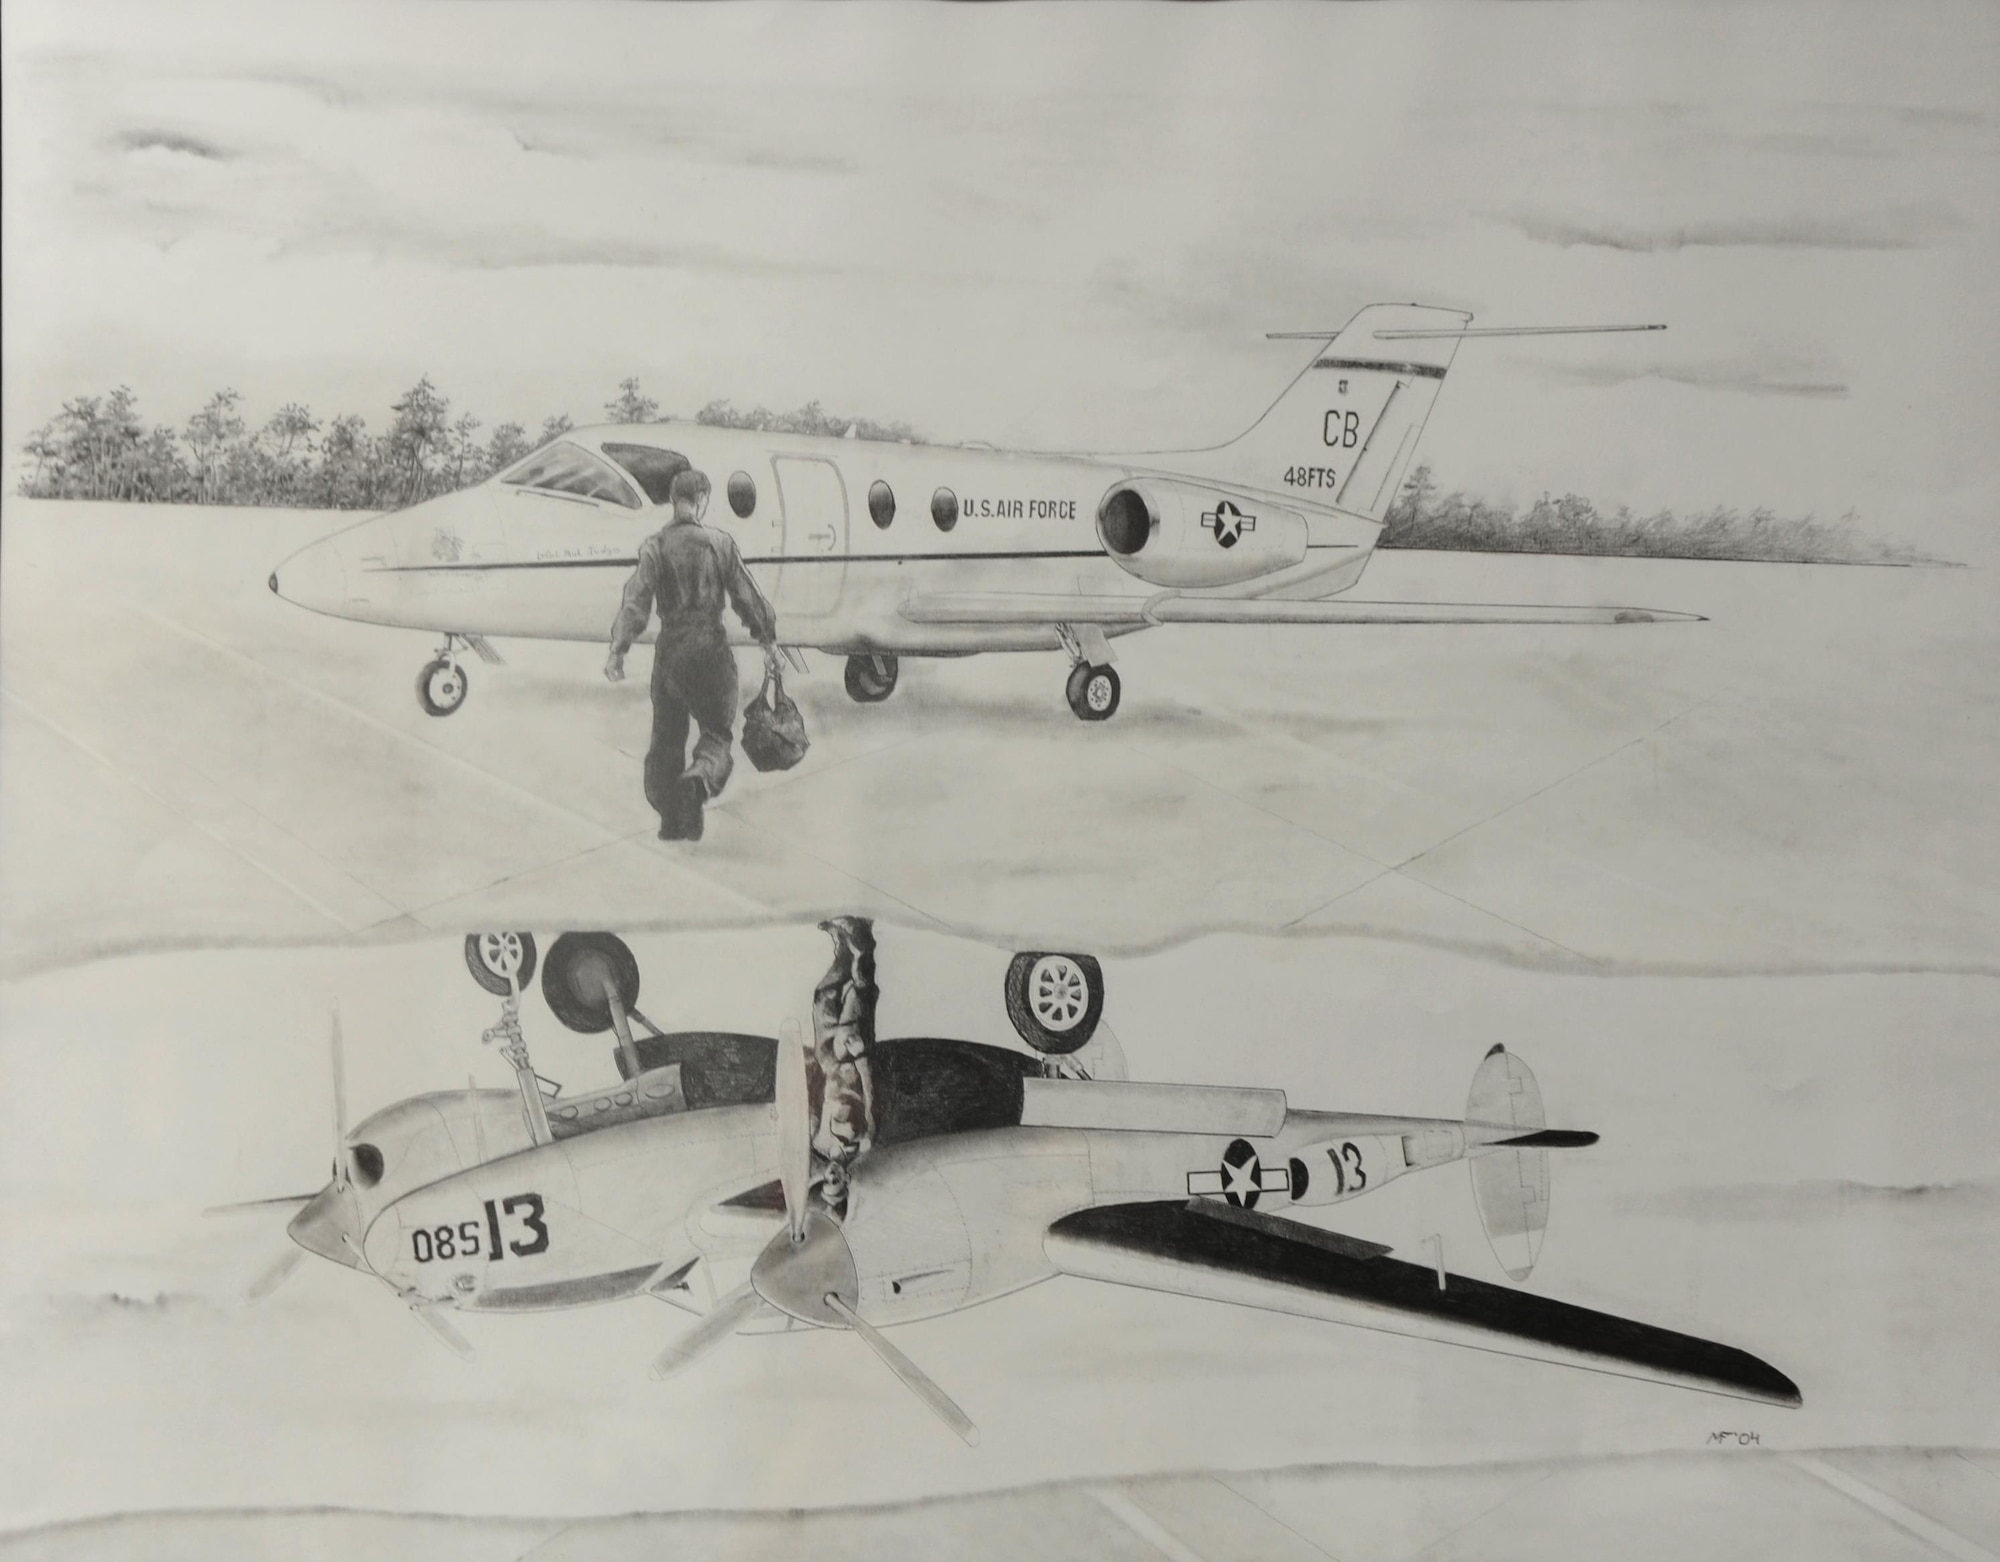 In this artist’s heritage sketch, a Specialized Undergraduate Pilot Training student pilot prepares to fly a T-1A Jayhawk, the 48th Flying Training Squadron’s current aircraft with a P-38 Lightning reflected in a puddle on the ramp. This drawing represents the past, present and future of the 48th Squadron. (U.S Air Force photo by Airman 1st Class Beaux Hebert)